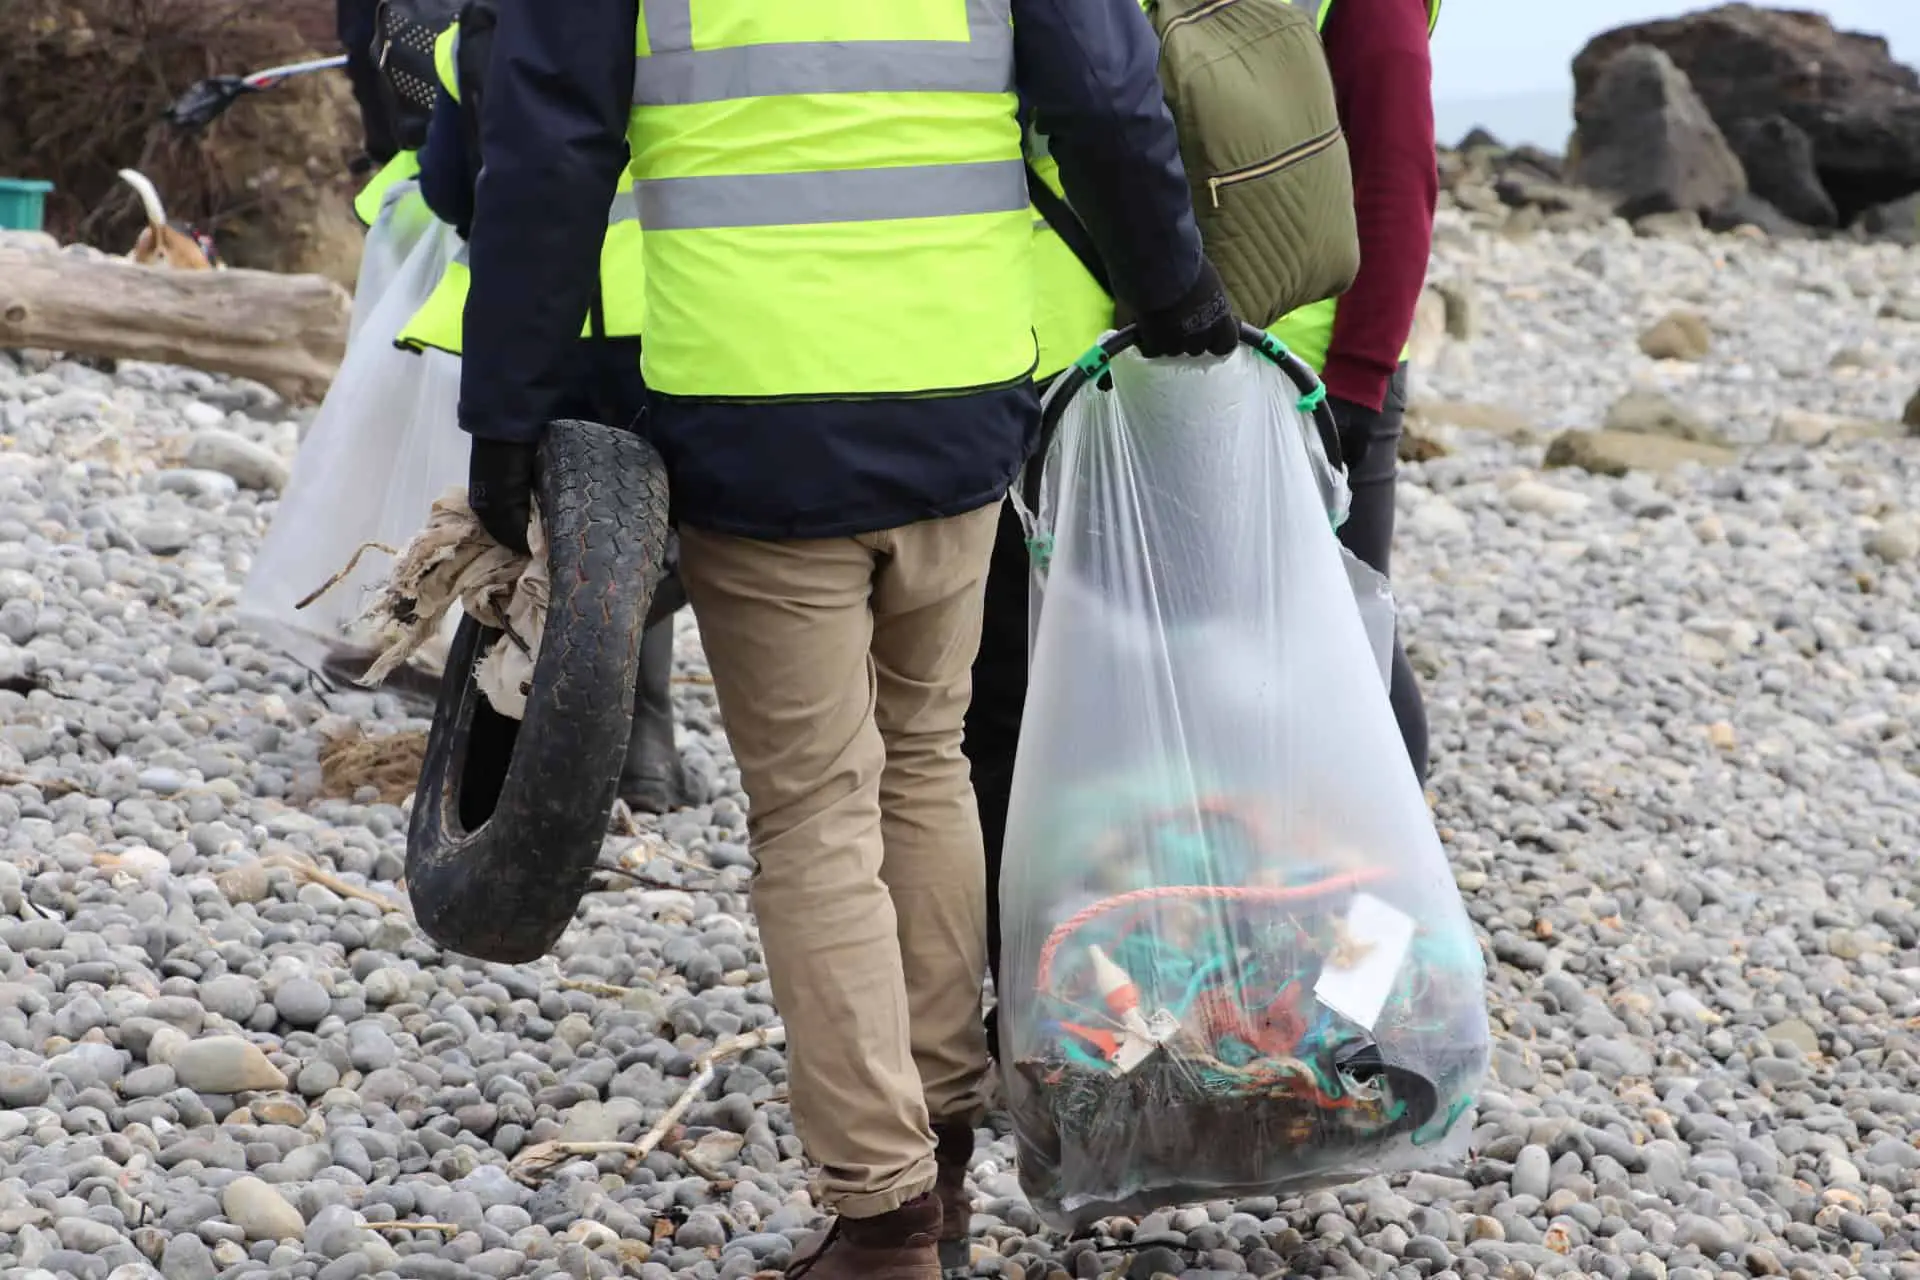 People on a 5-minute beach clean